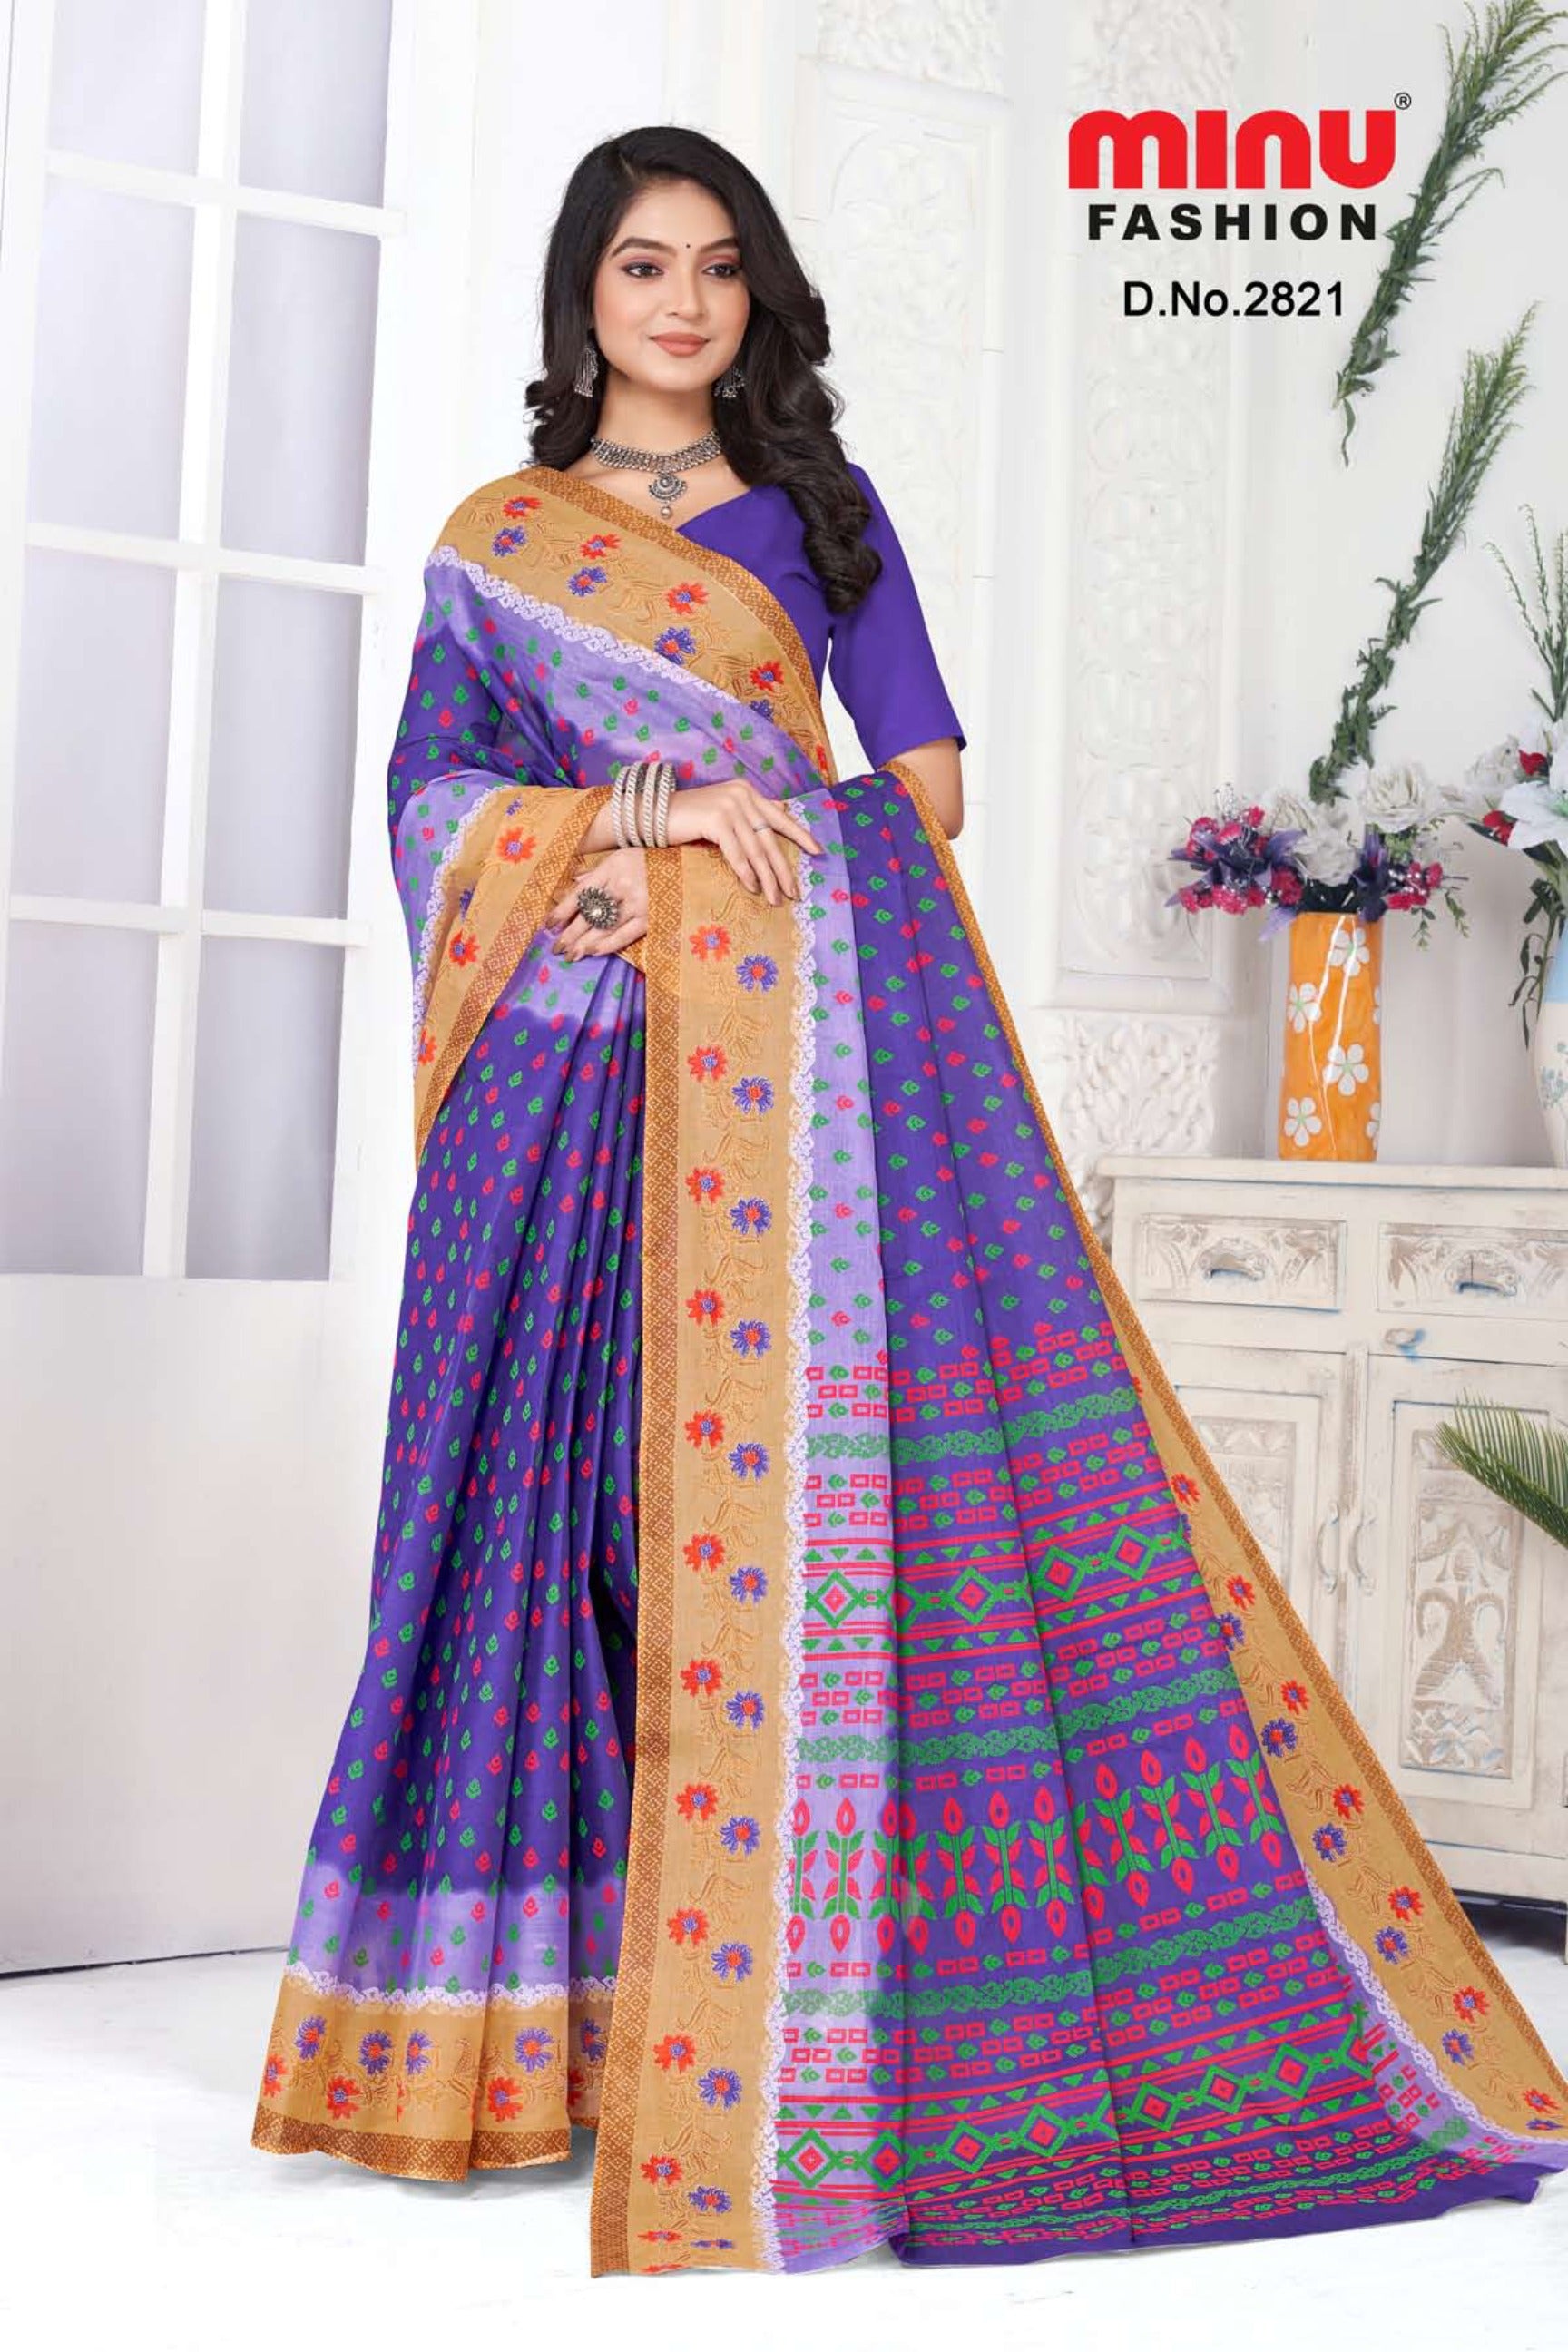 Bengali Durga puja special saree for women and girls in India 